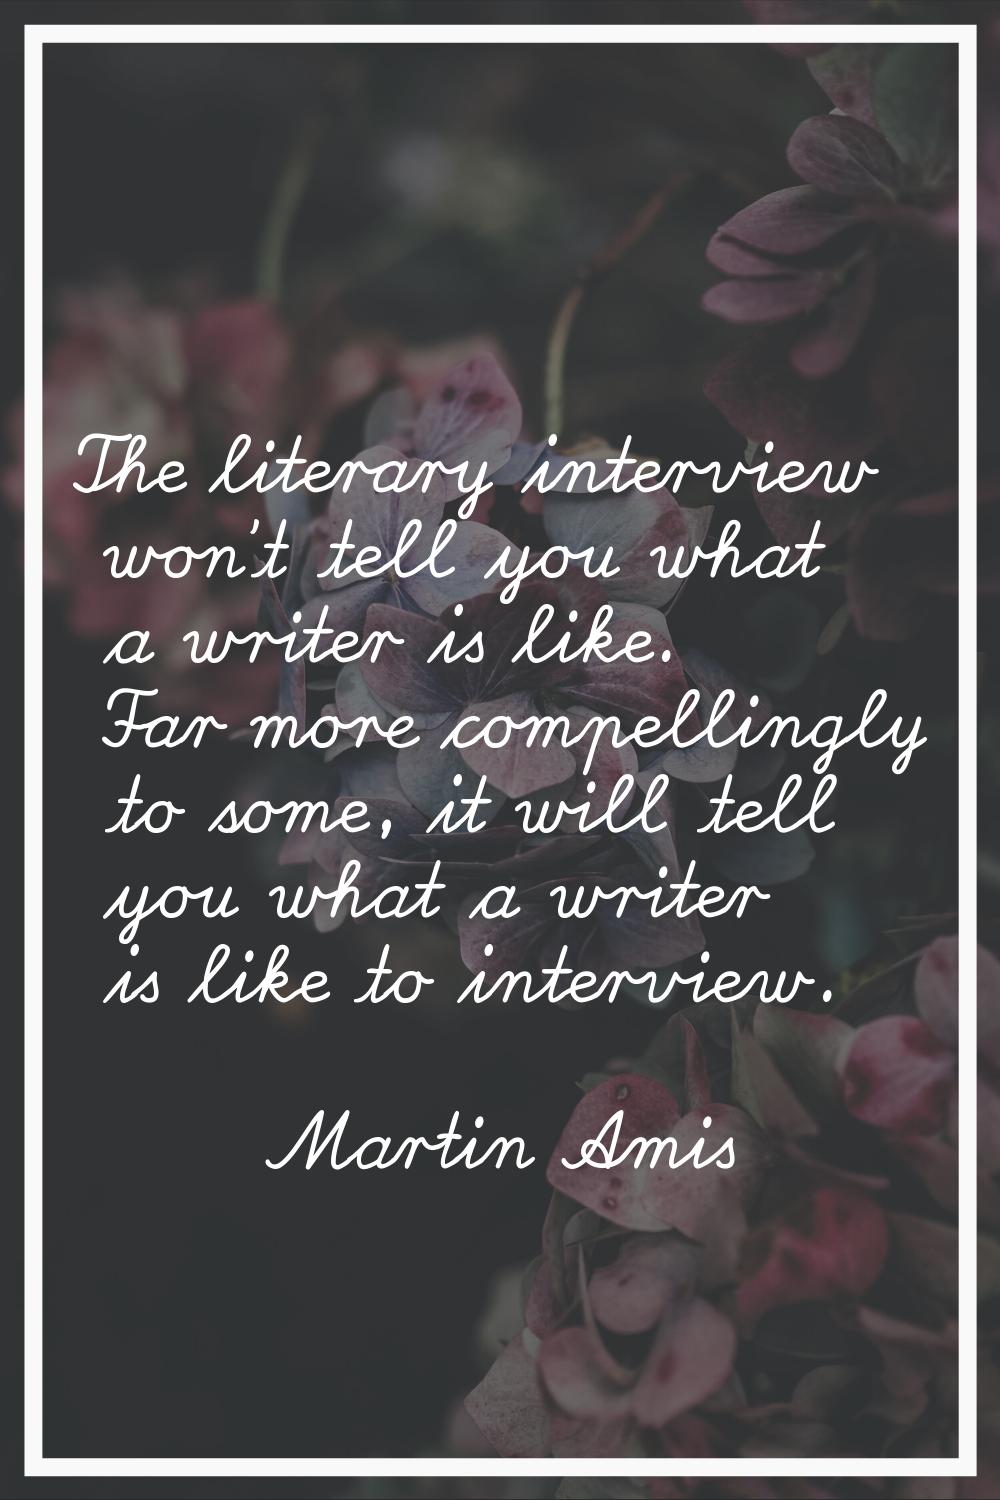 The literary interview won't tell you what a writer is like. Far more compellingly to some, it will